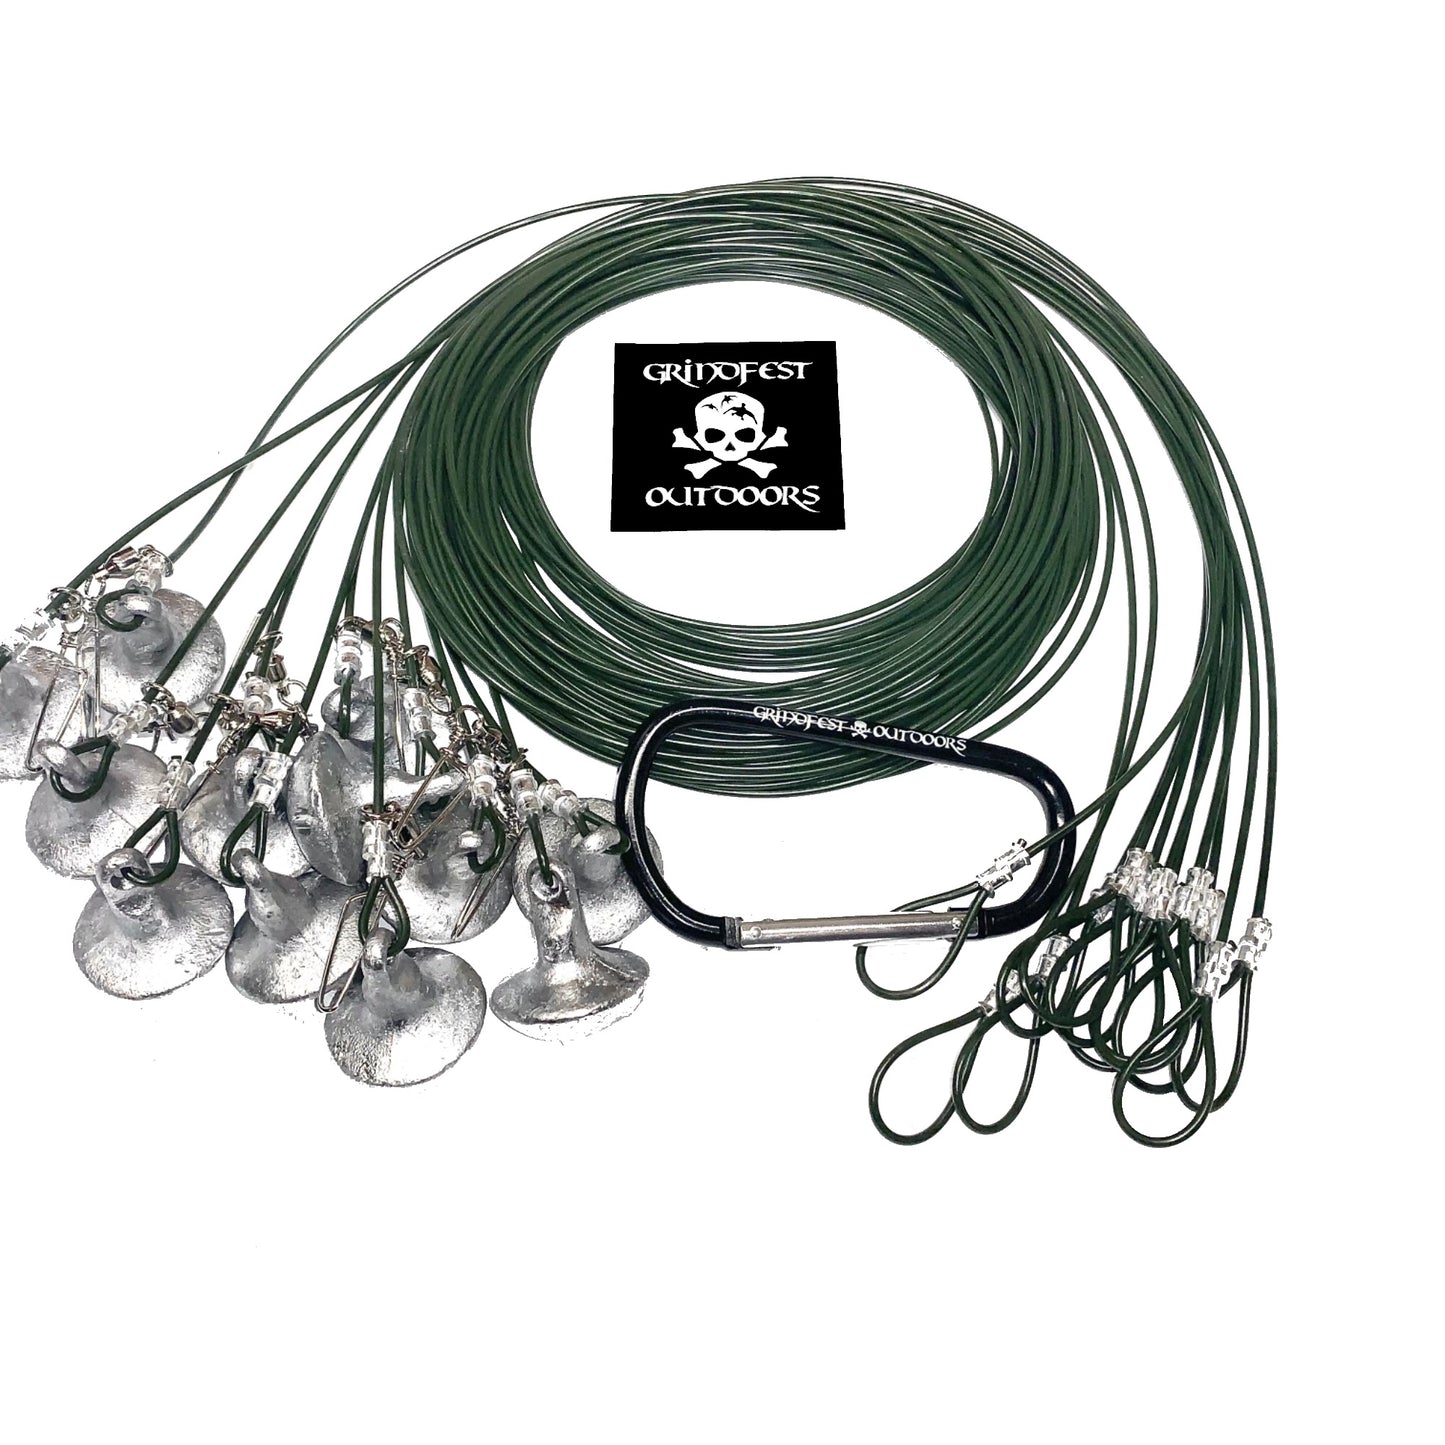 8oz Coated Steel Cable Texas Rigs